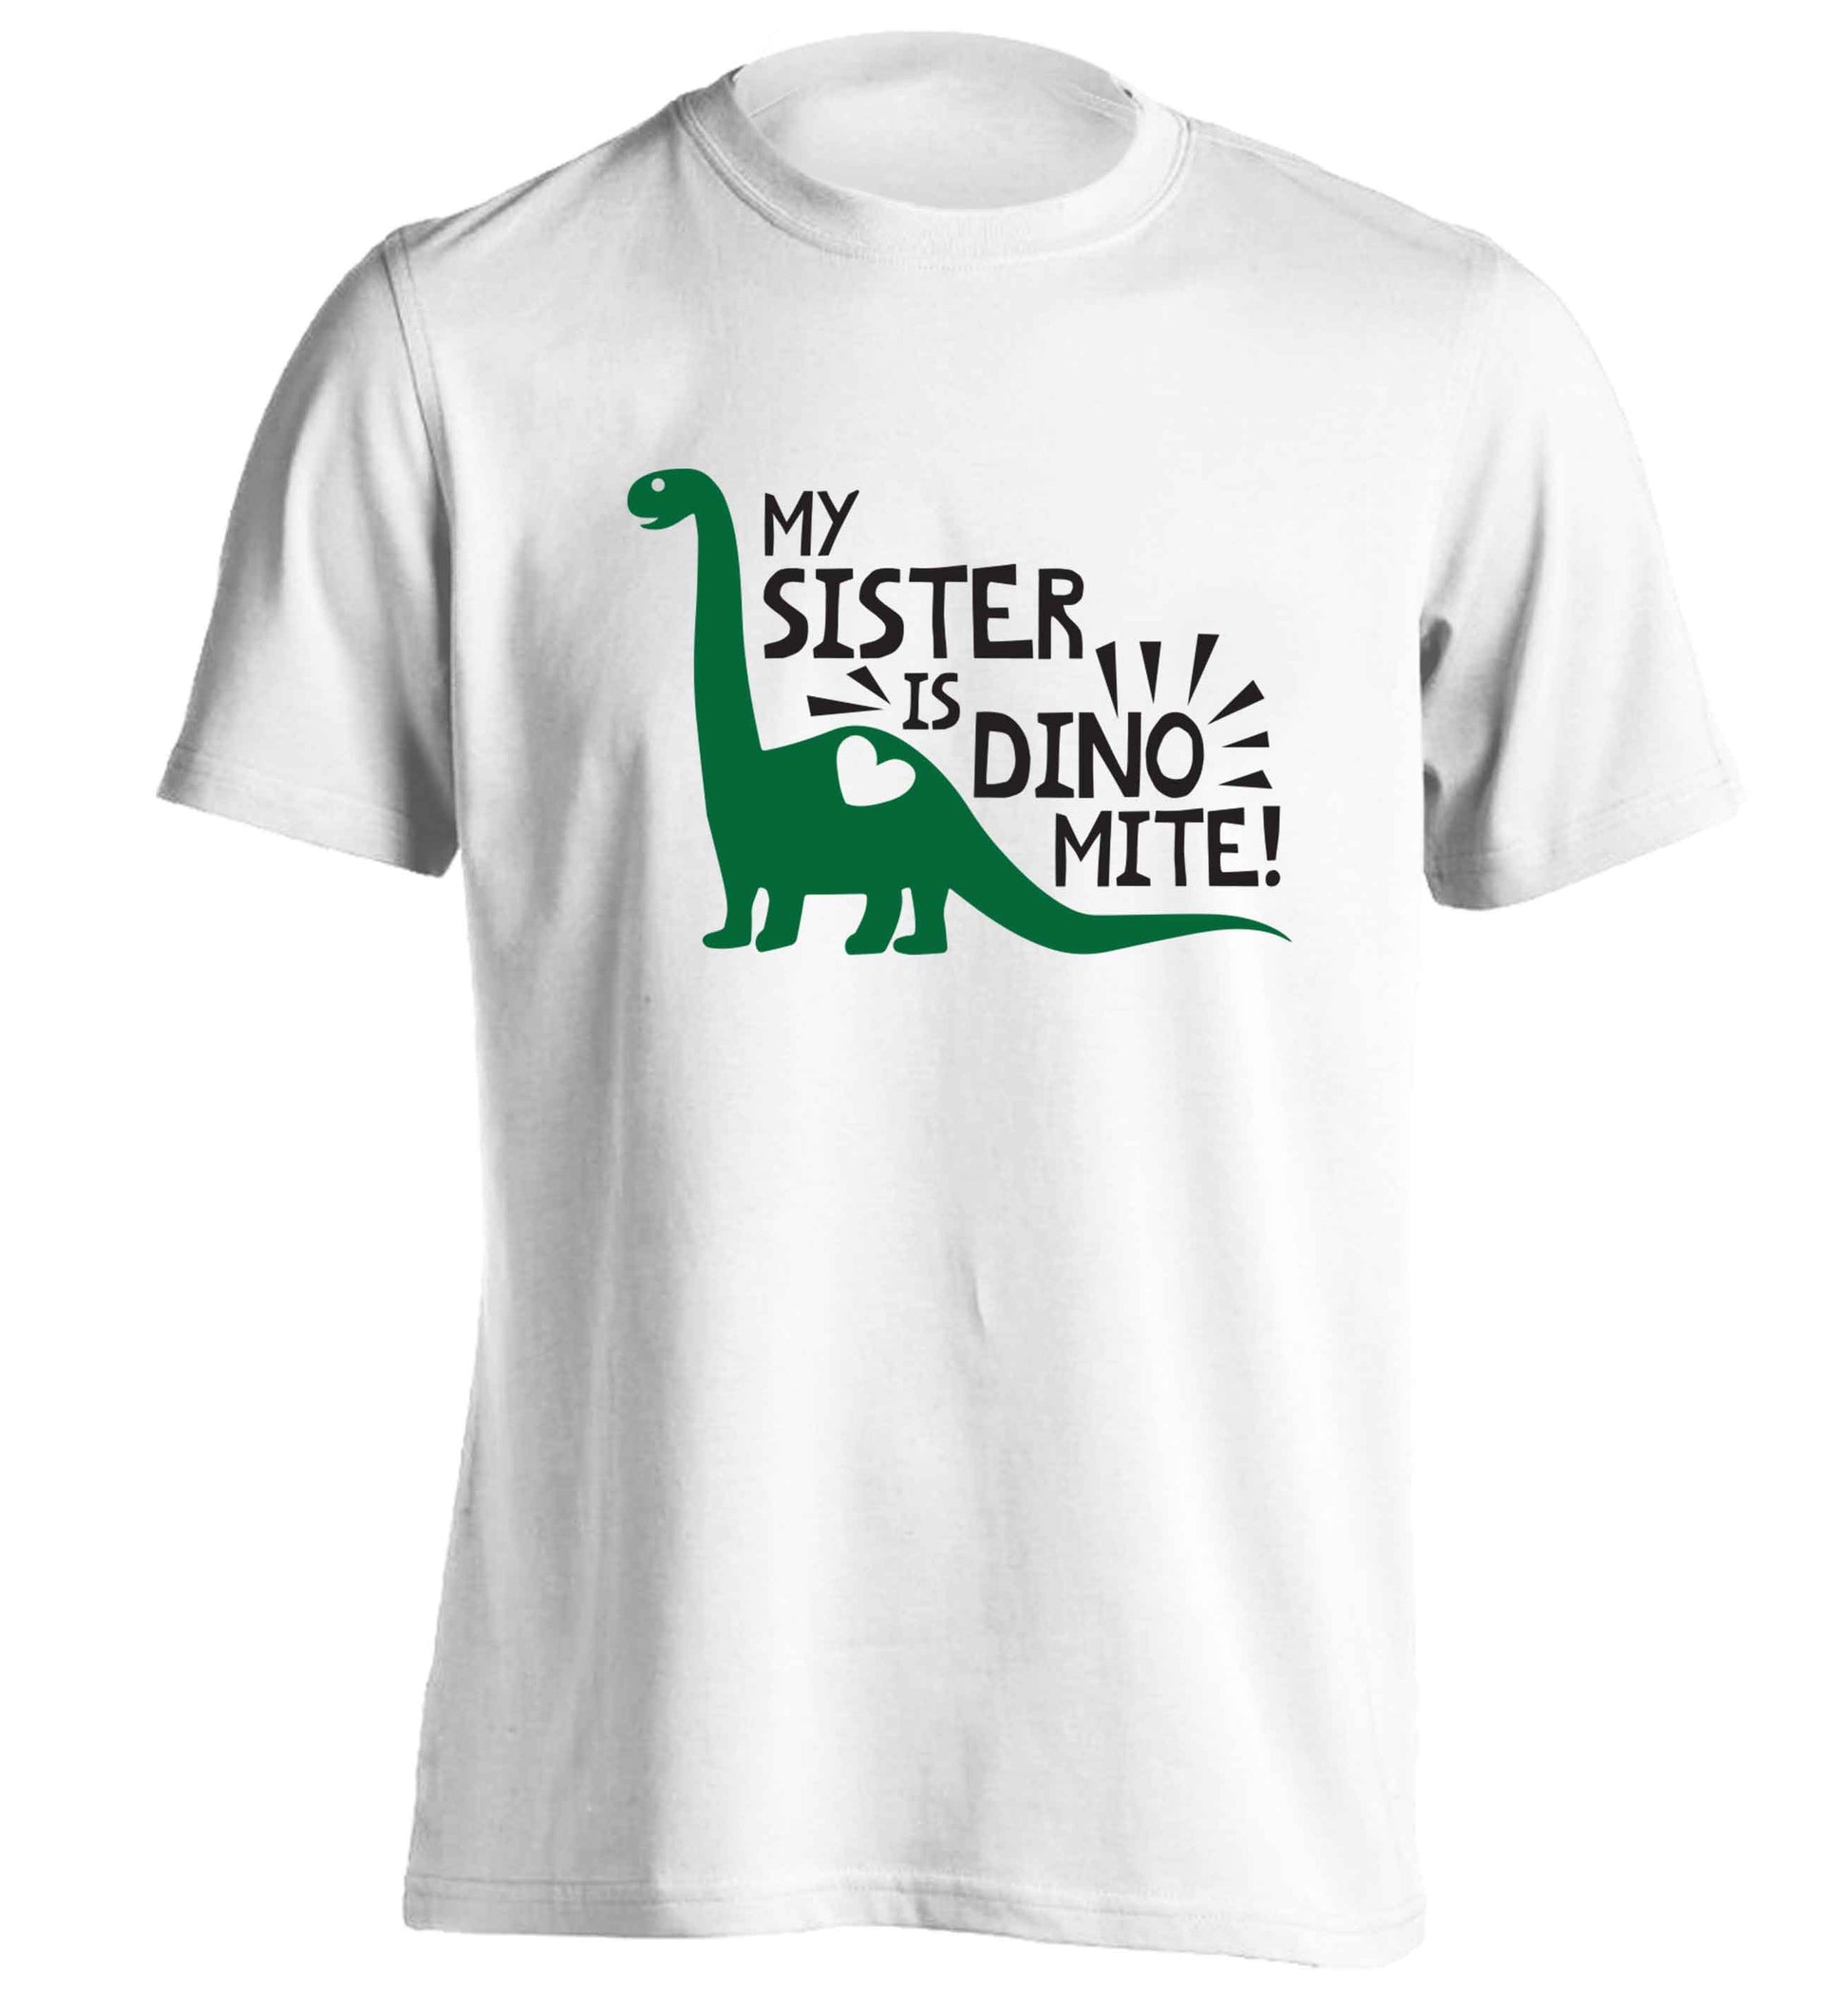 My sister is dinomite! adults unisex white Tshirt 2XL